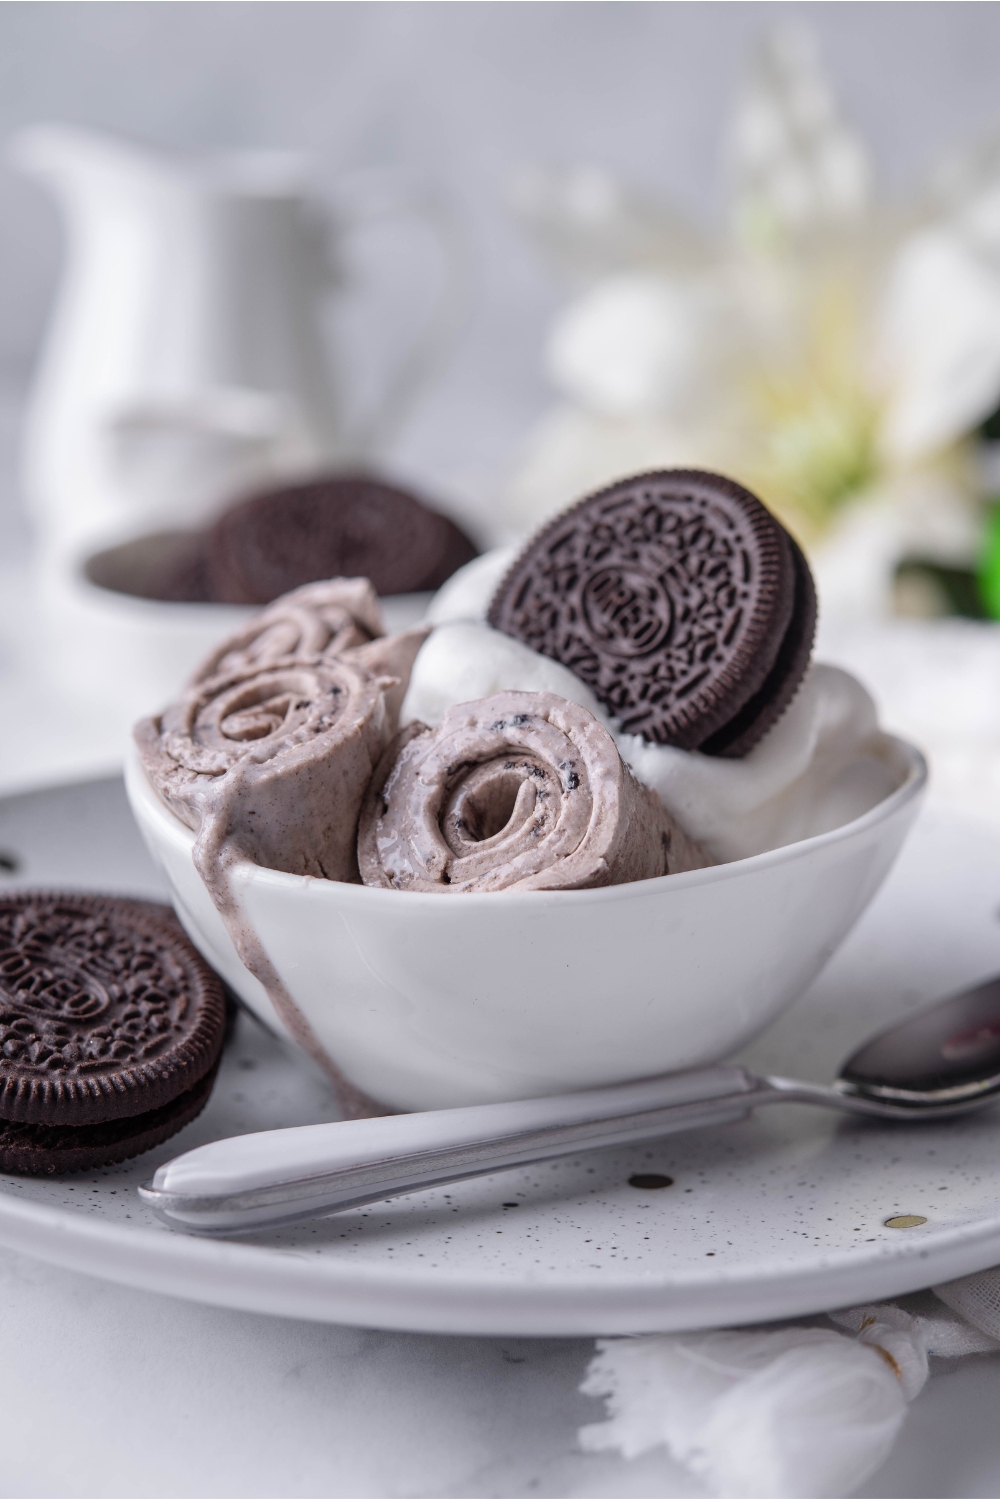 A few ice cream rolls in a bowl with whipped cream and an Oreo.